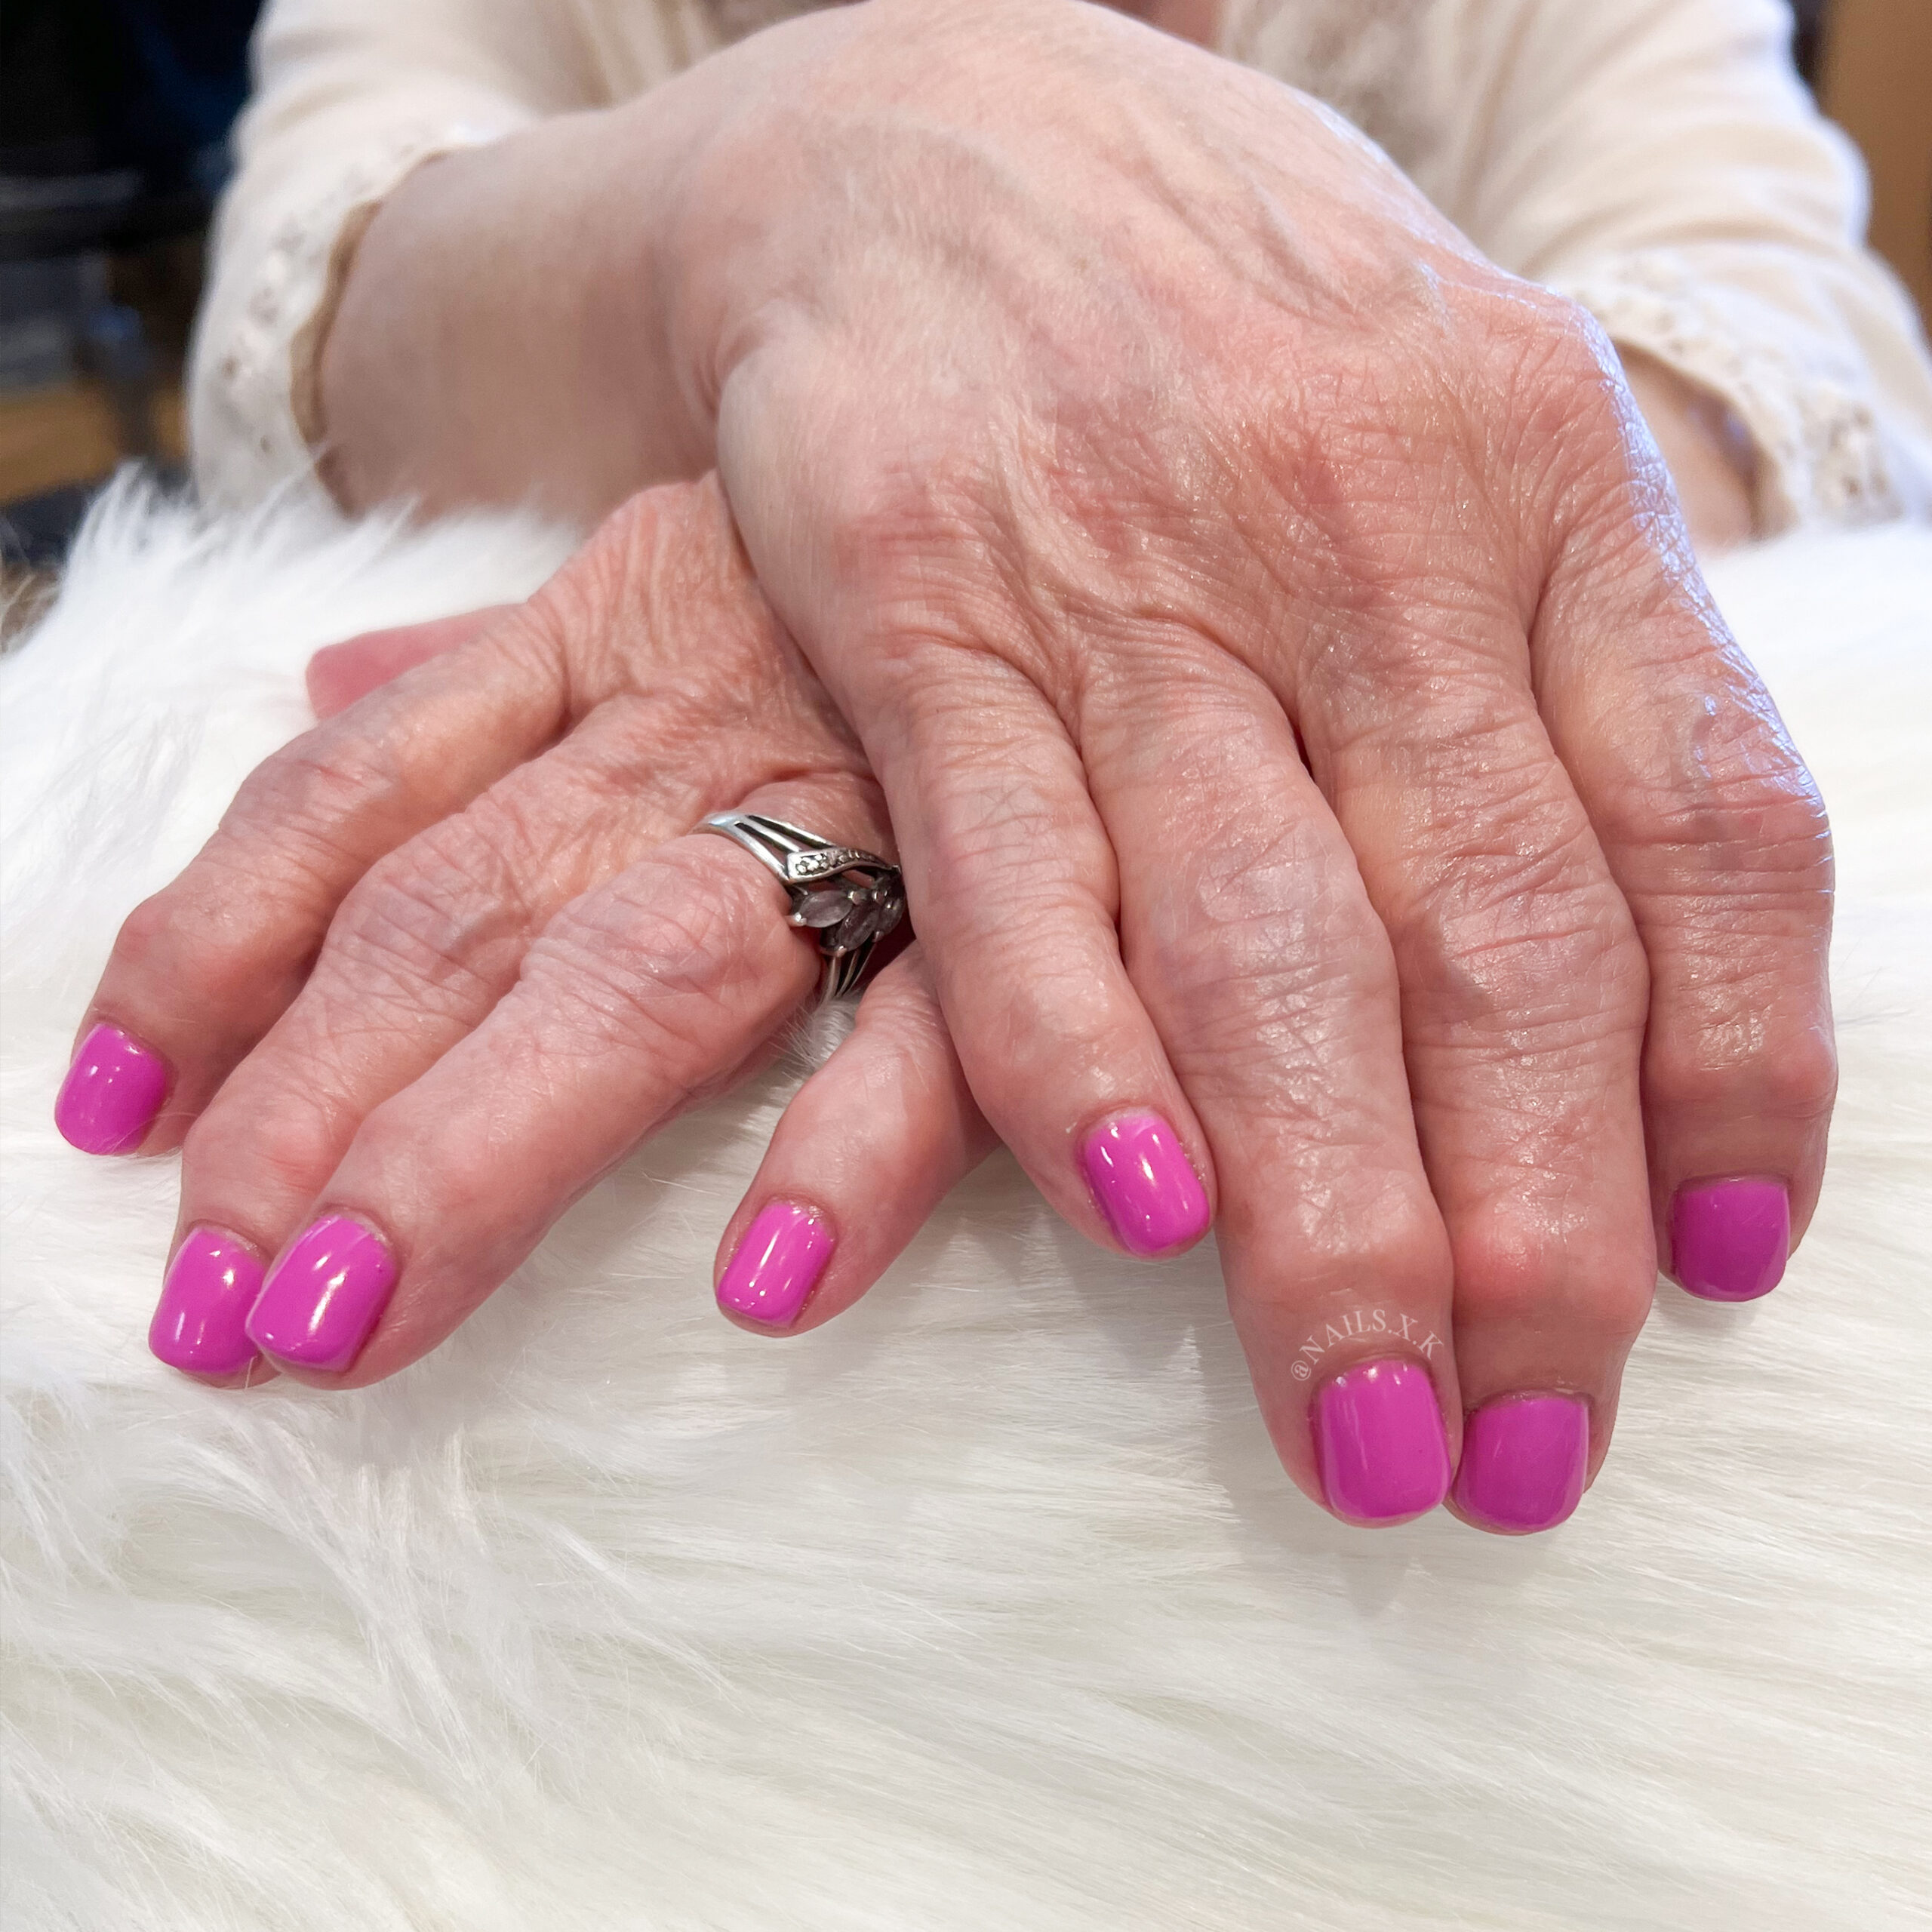 Hot pink gel manicure. Nails by K